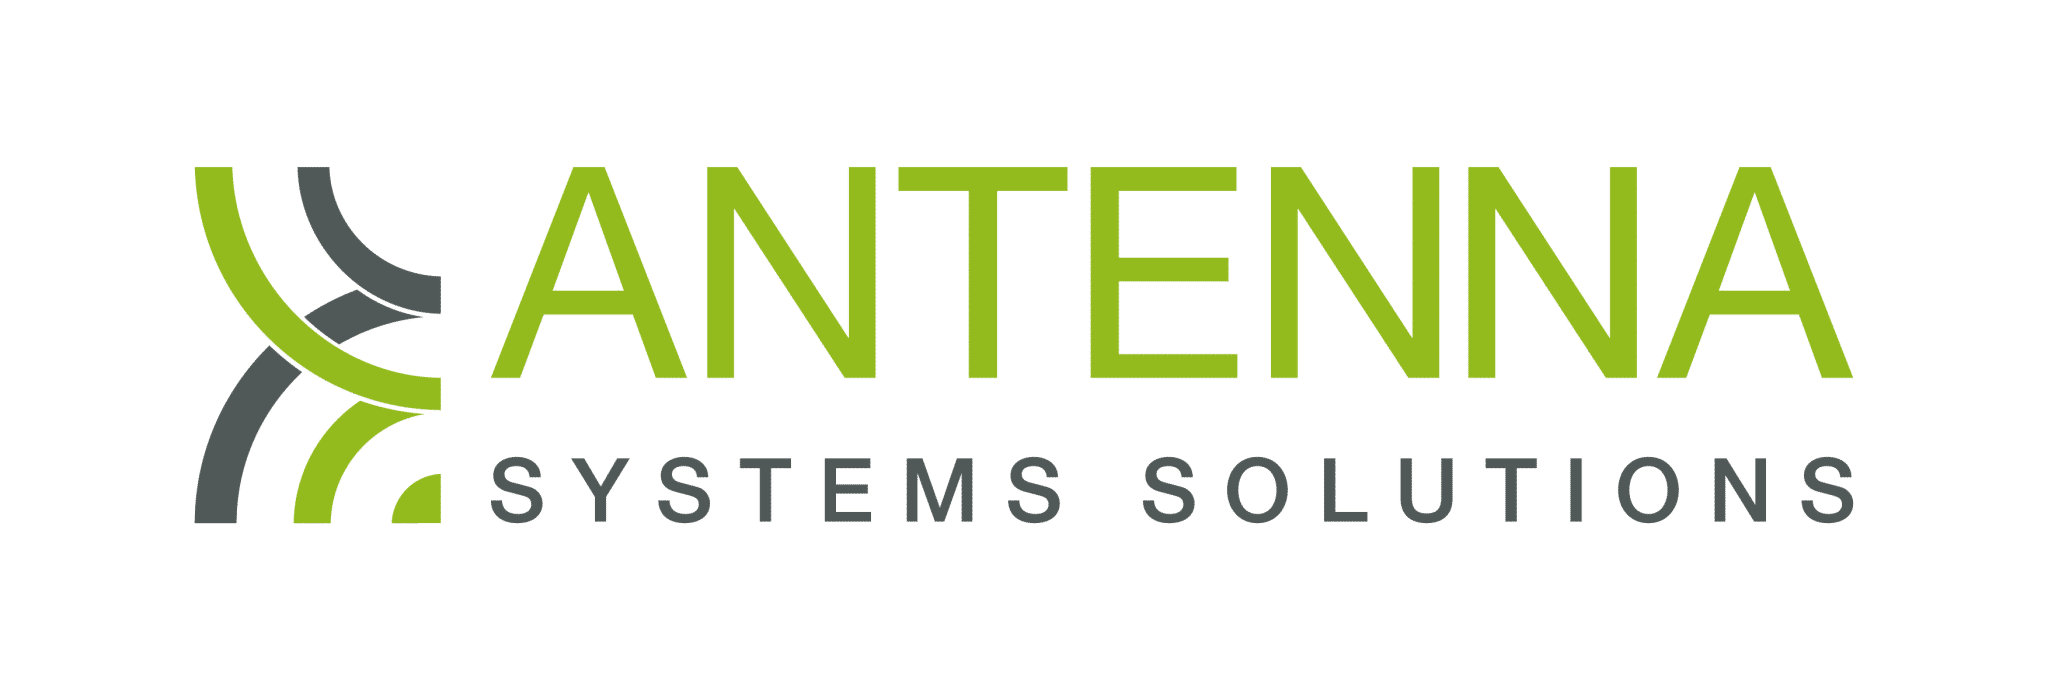 Antenna Systems & Solutions | MDL Technologies